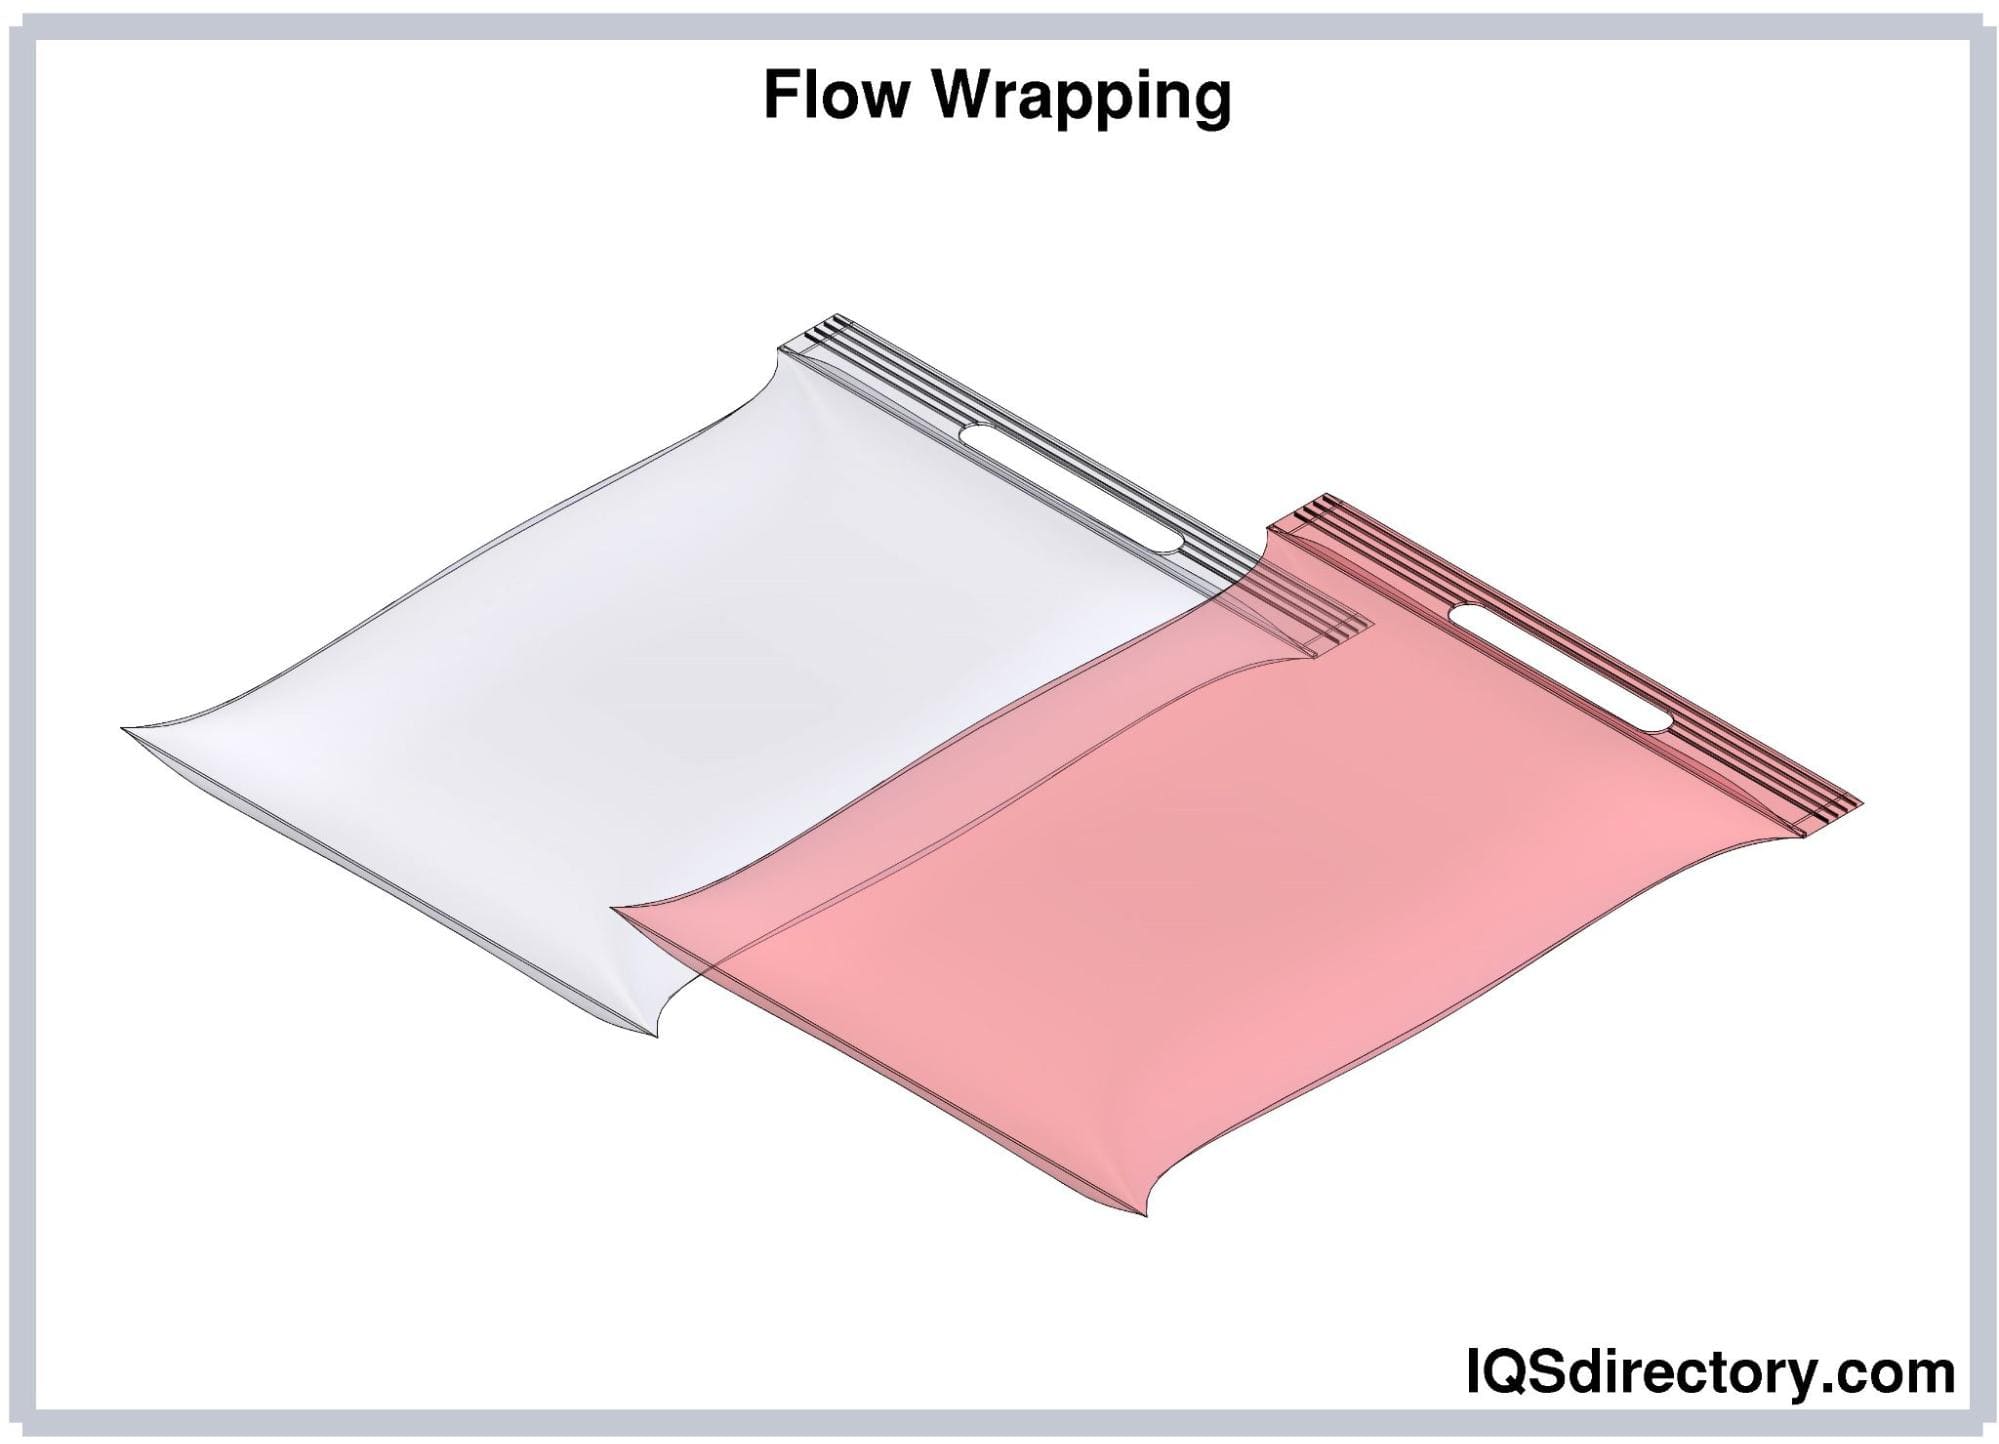 Flow Wrapping